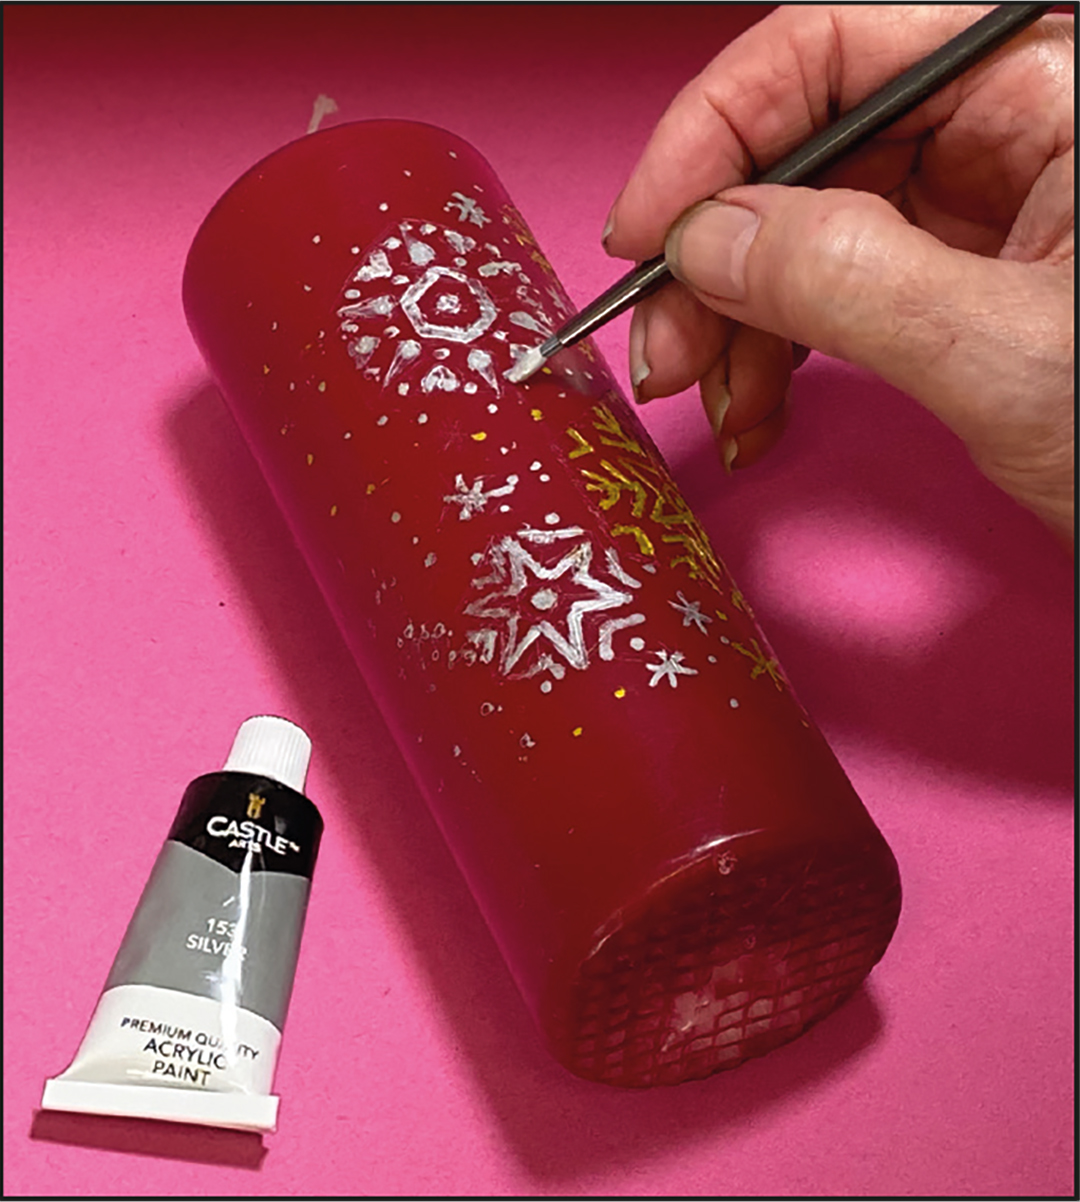 An artist painting over the pencil indentations on a Christmas candle with acrylic paint.